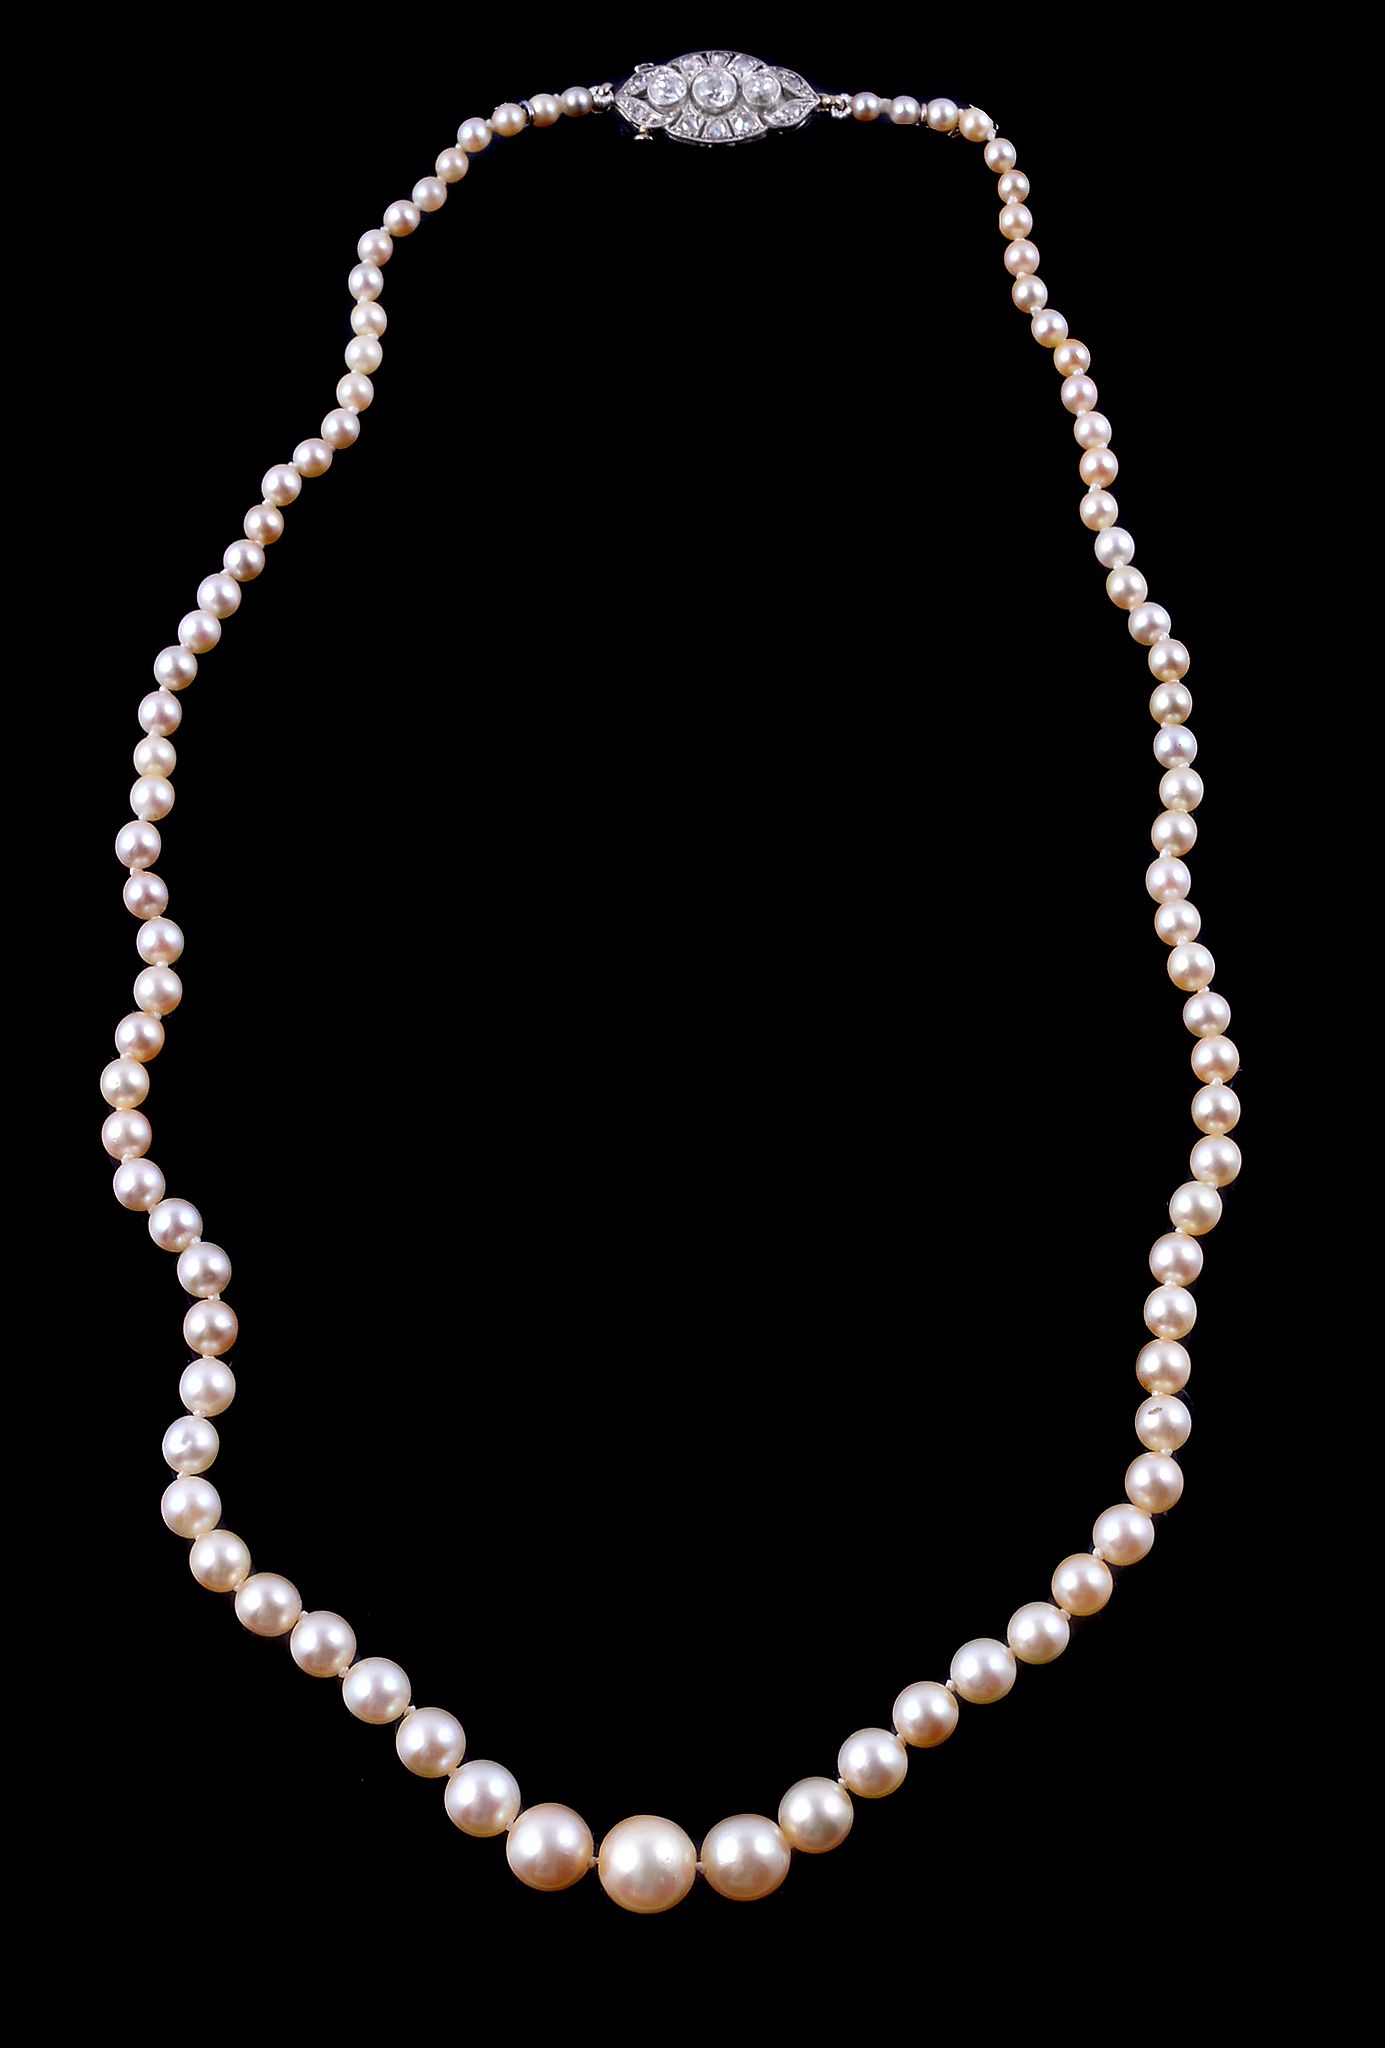 A cultured pearl necklace, composed of graduating cultured pearls, measuring 0.3cm to 0.8cm, on a